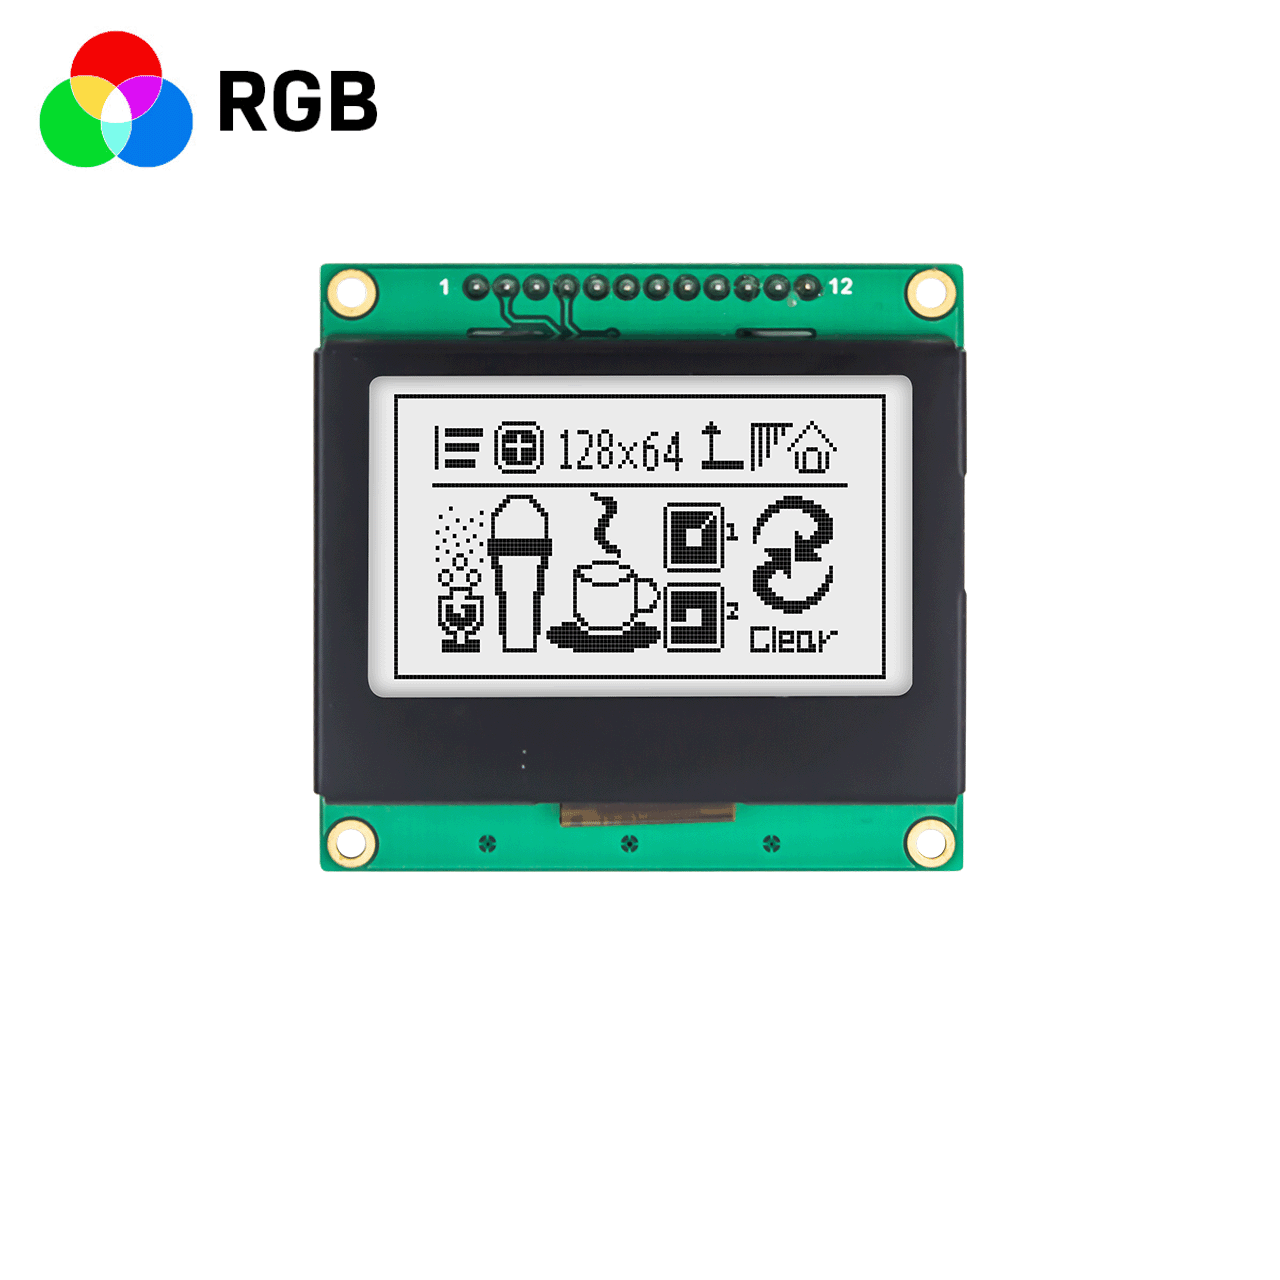 2" 128x64 Graphic LCD | 128 x 64 Graphic LCD | FSTN Positive | SPI Interface | RGB Red Green Blue Backlight